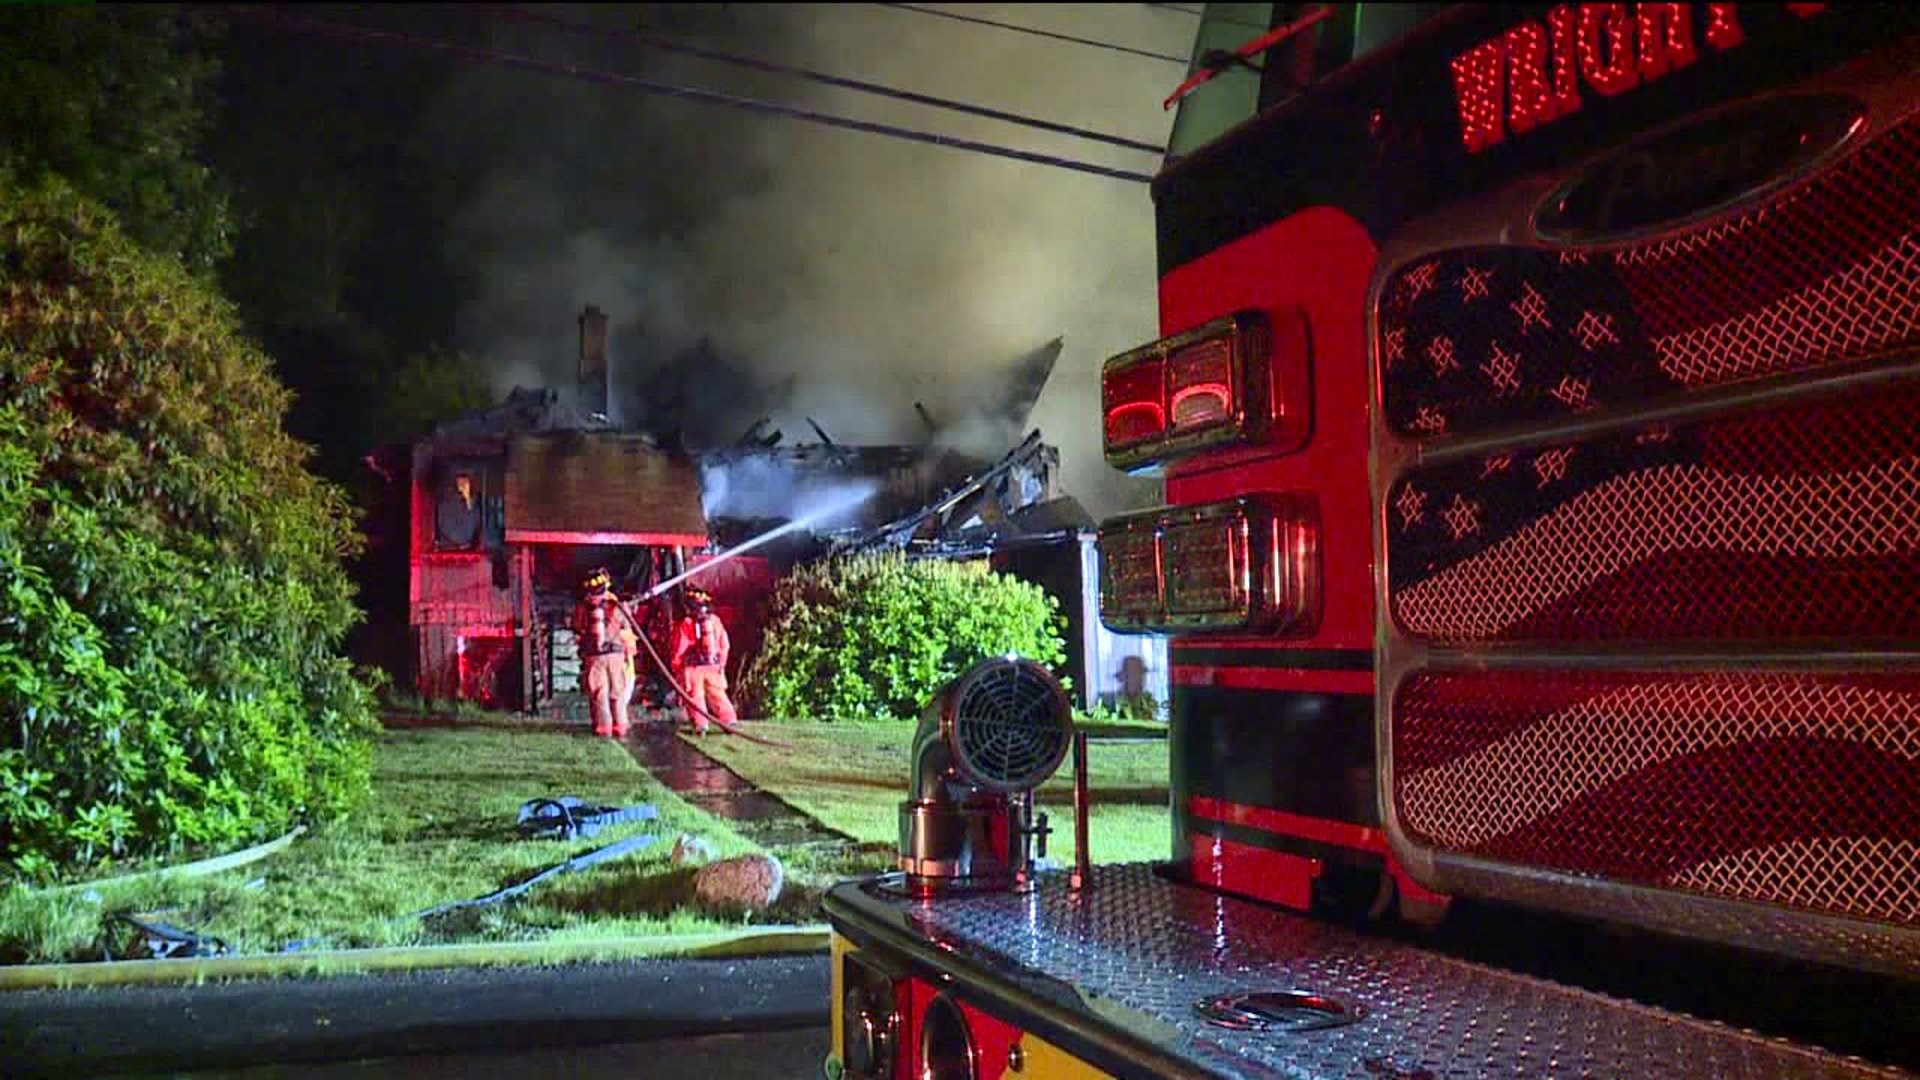 Fire Destroys Home in Luzerne County